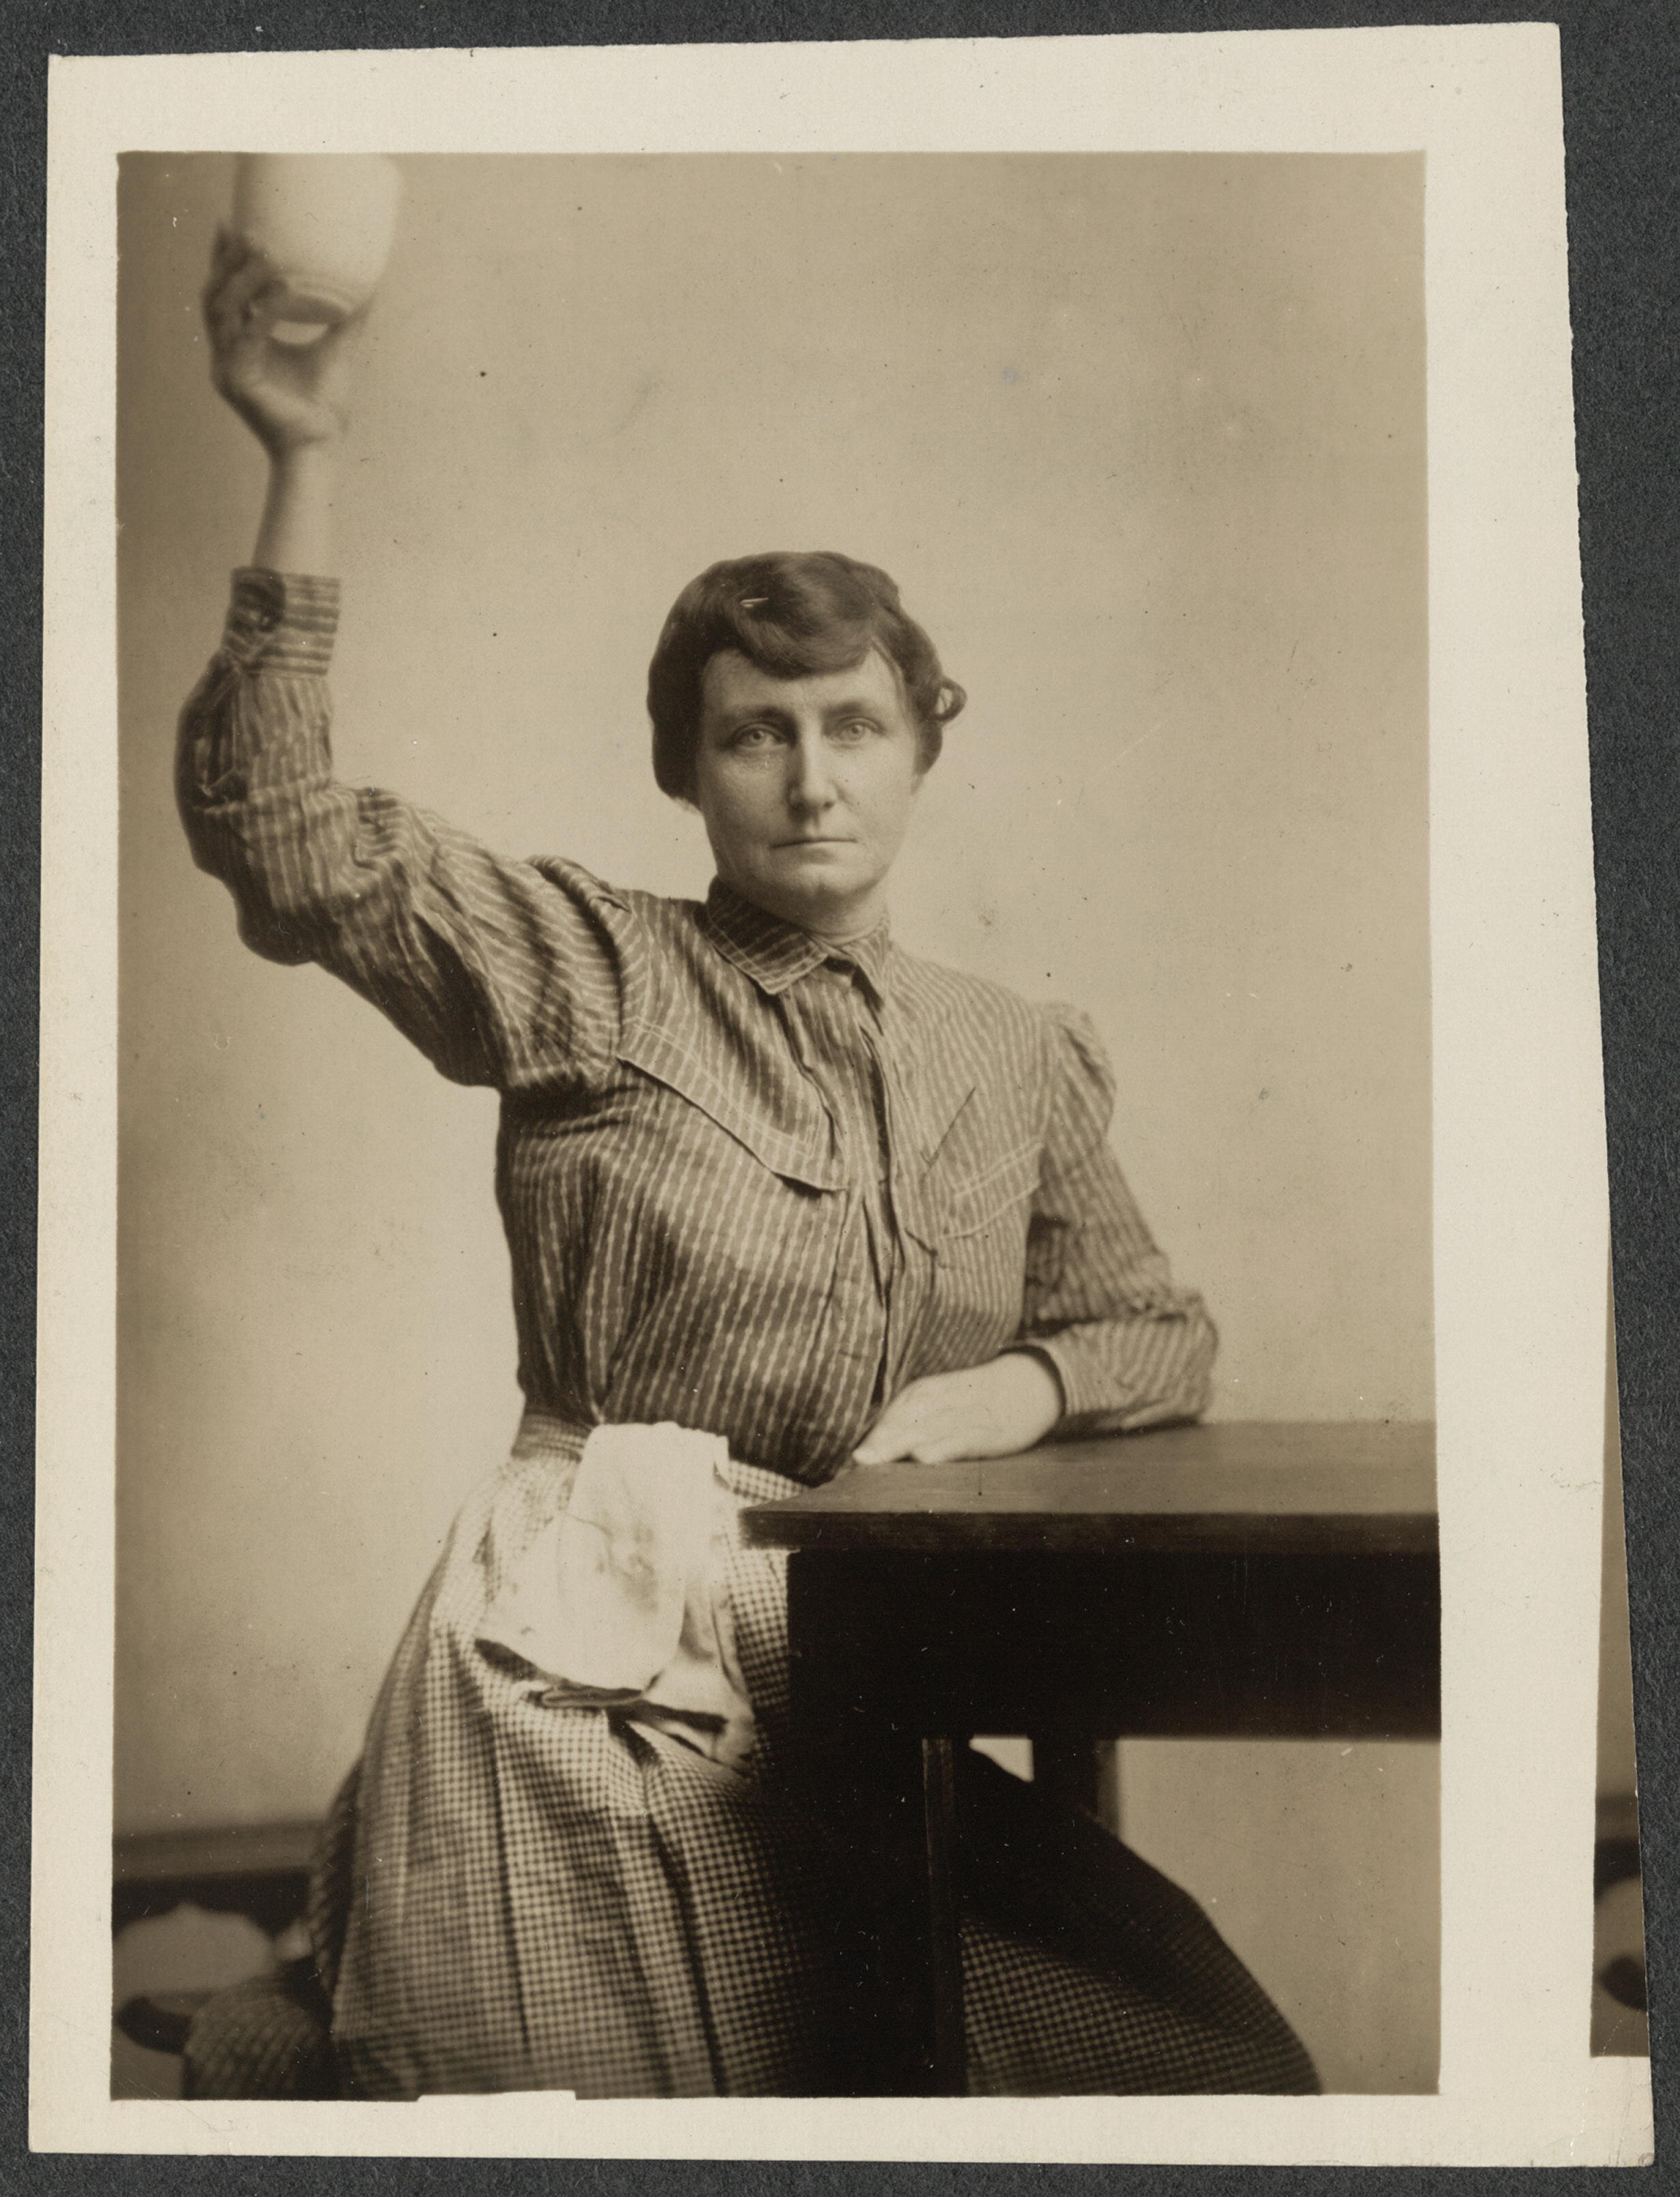 Mrs. Pauline Adams in the prison garb she wore while serving a sixty-day sentence